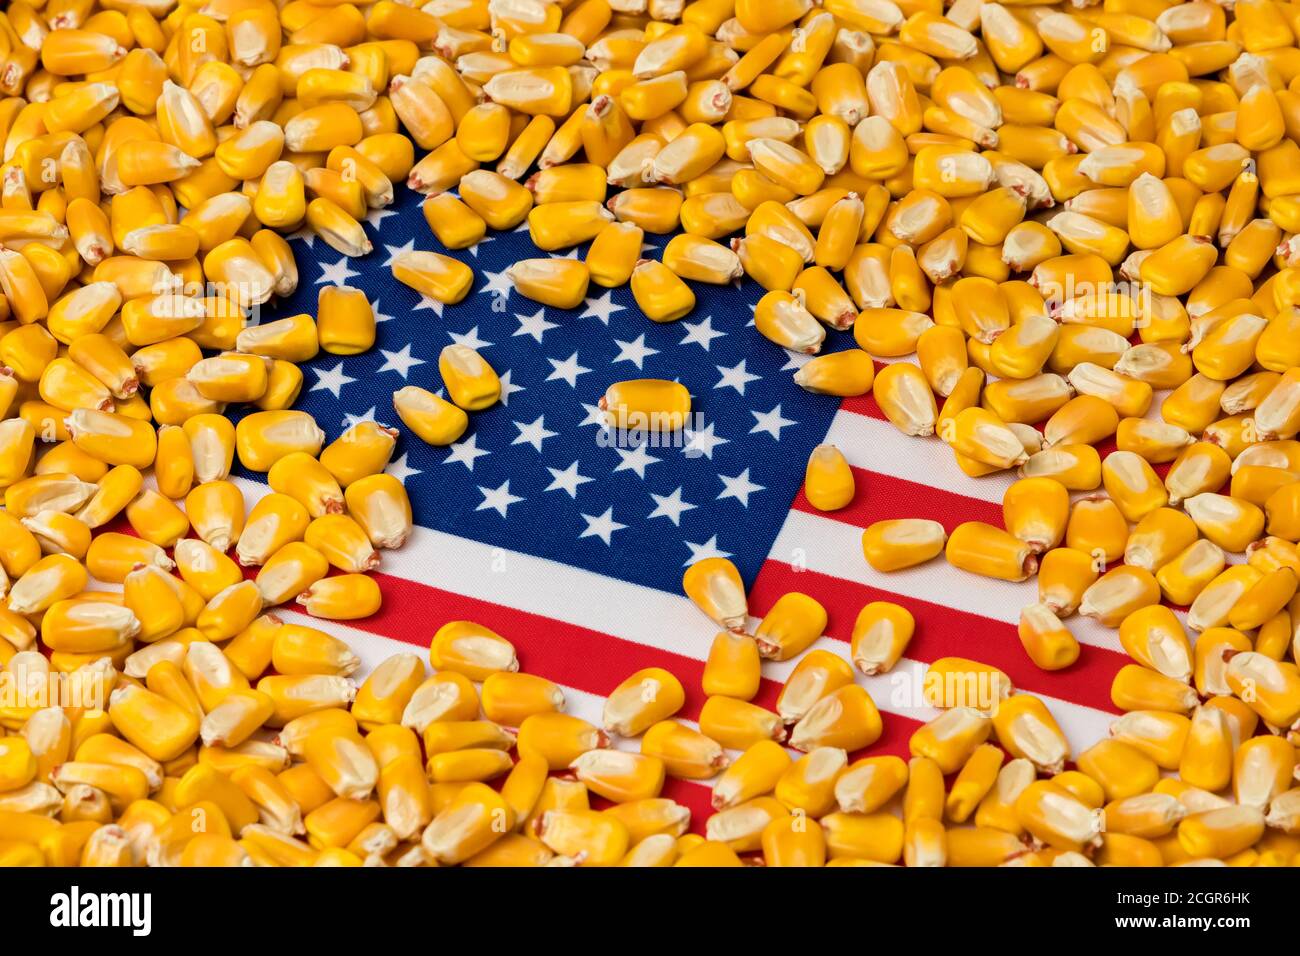 Flag of United States of America covered in corn kernels. Concept of American agriculture imports, exports, ethanol, trade war, agreement and tariffs. Stock Photo